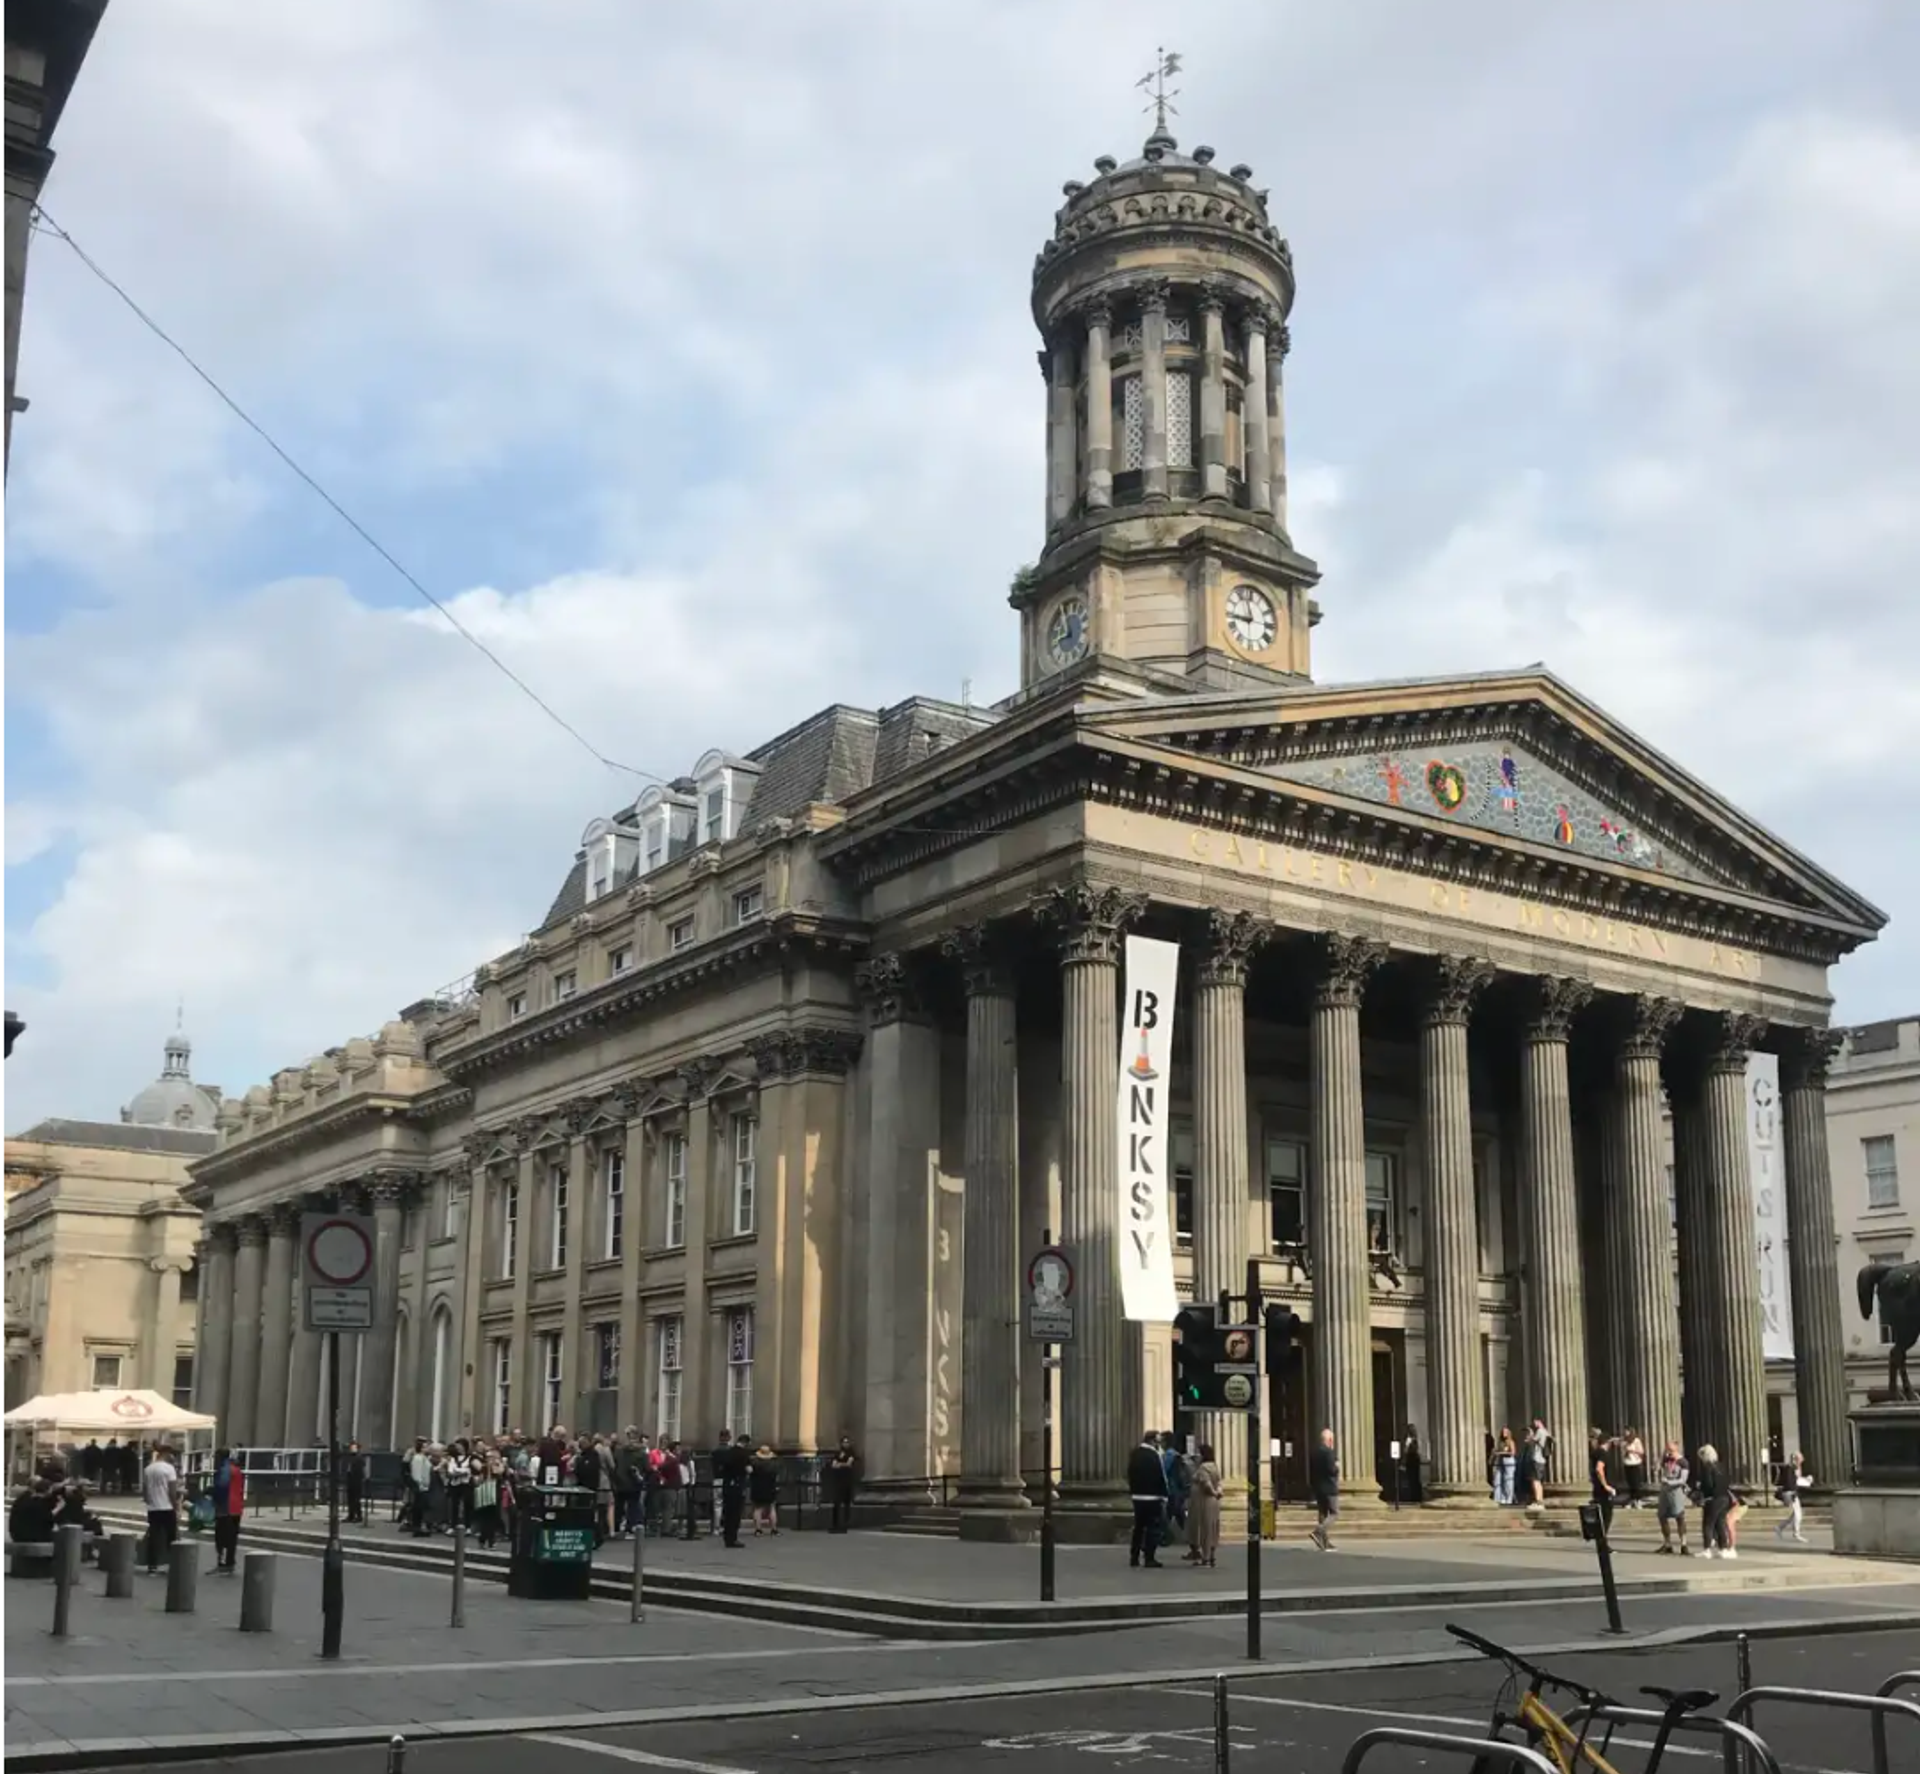 A photo of the outside street entrance to GoMA featuring Banksy's Cut n Run exhibition, displaying a white hanging banner that reads 'Cut N Run' .